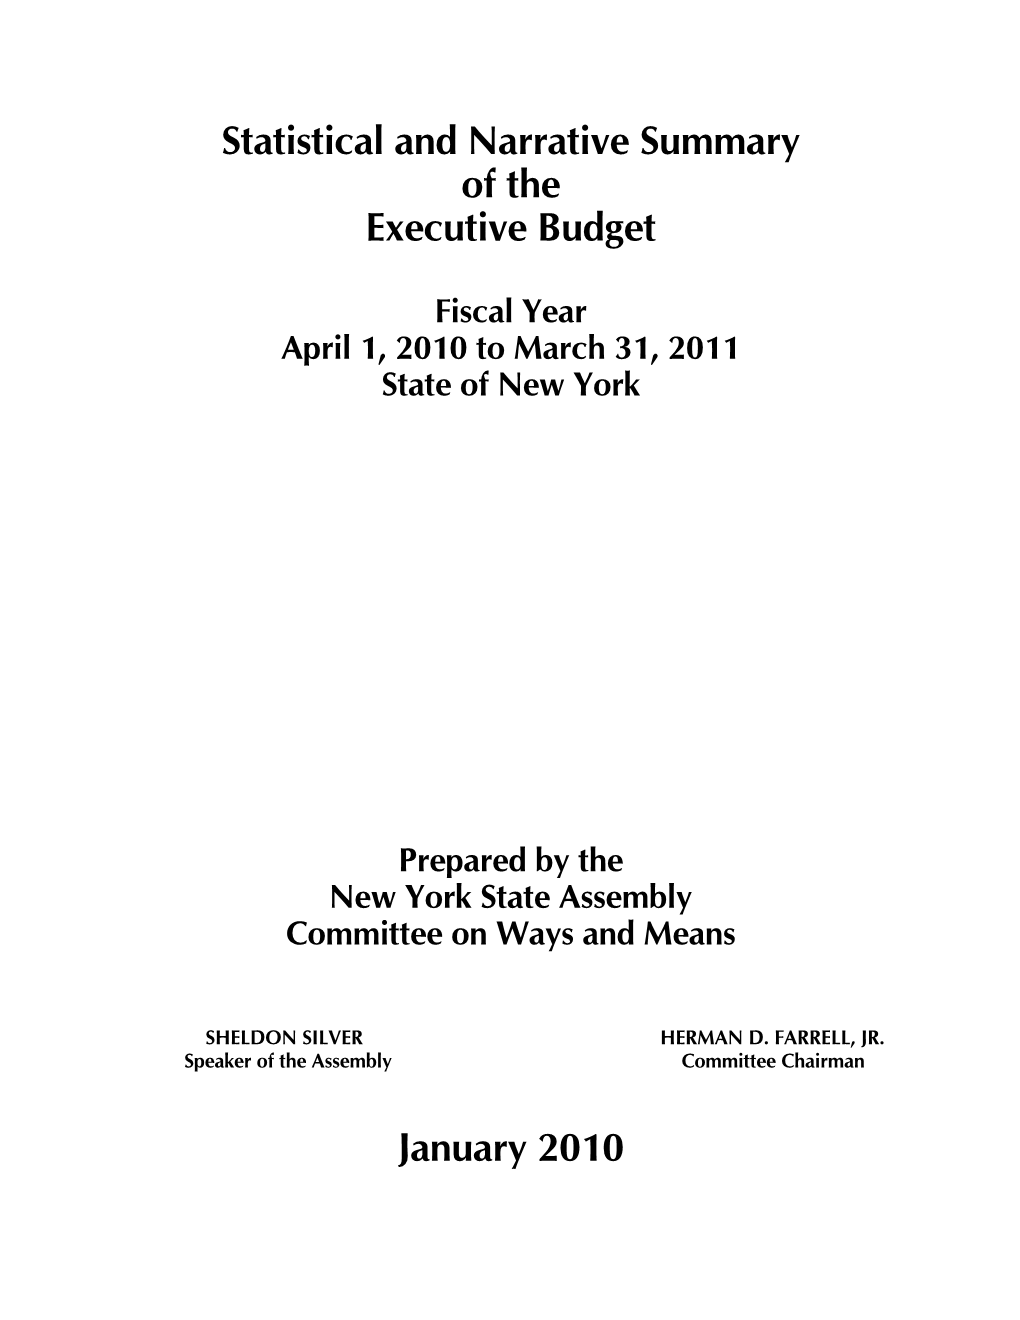 Statistical and Narrative Summary of the Executive Budget January 2010